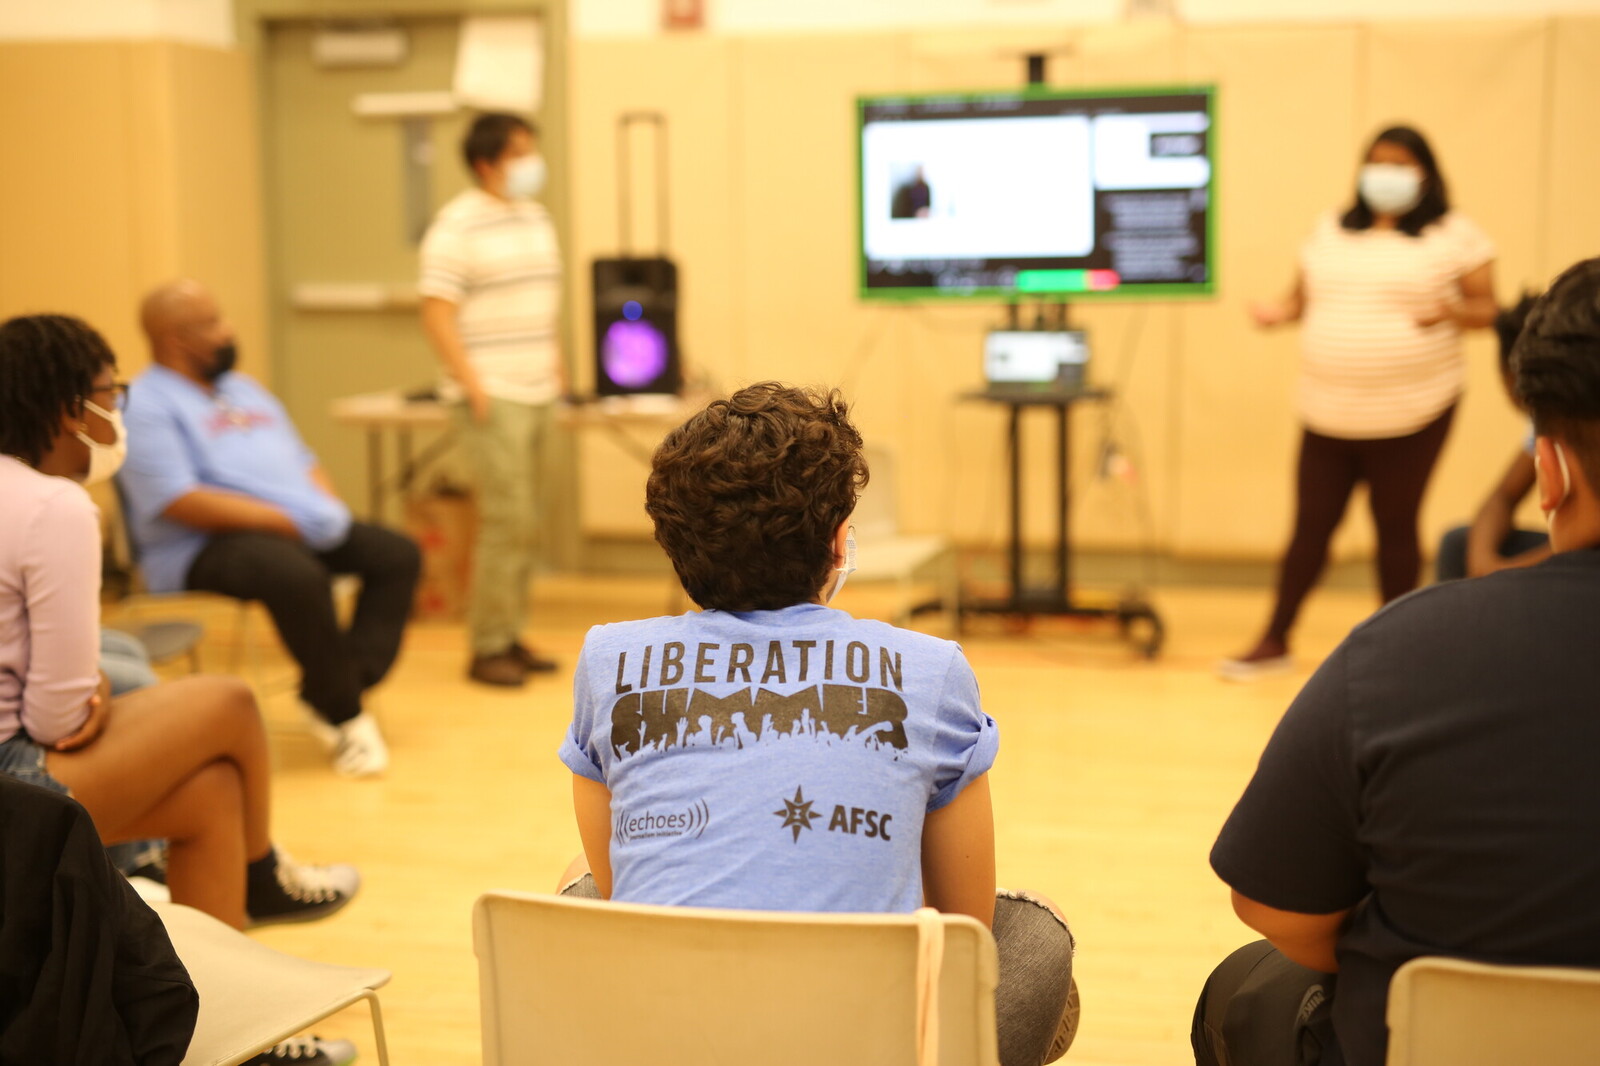 youth in a rec center listening to a presenter speak next to a virtual blackboard